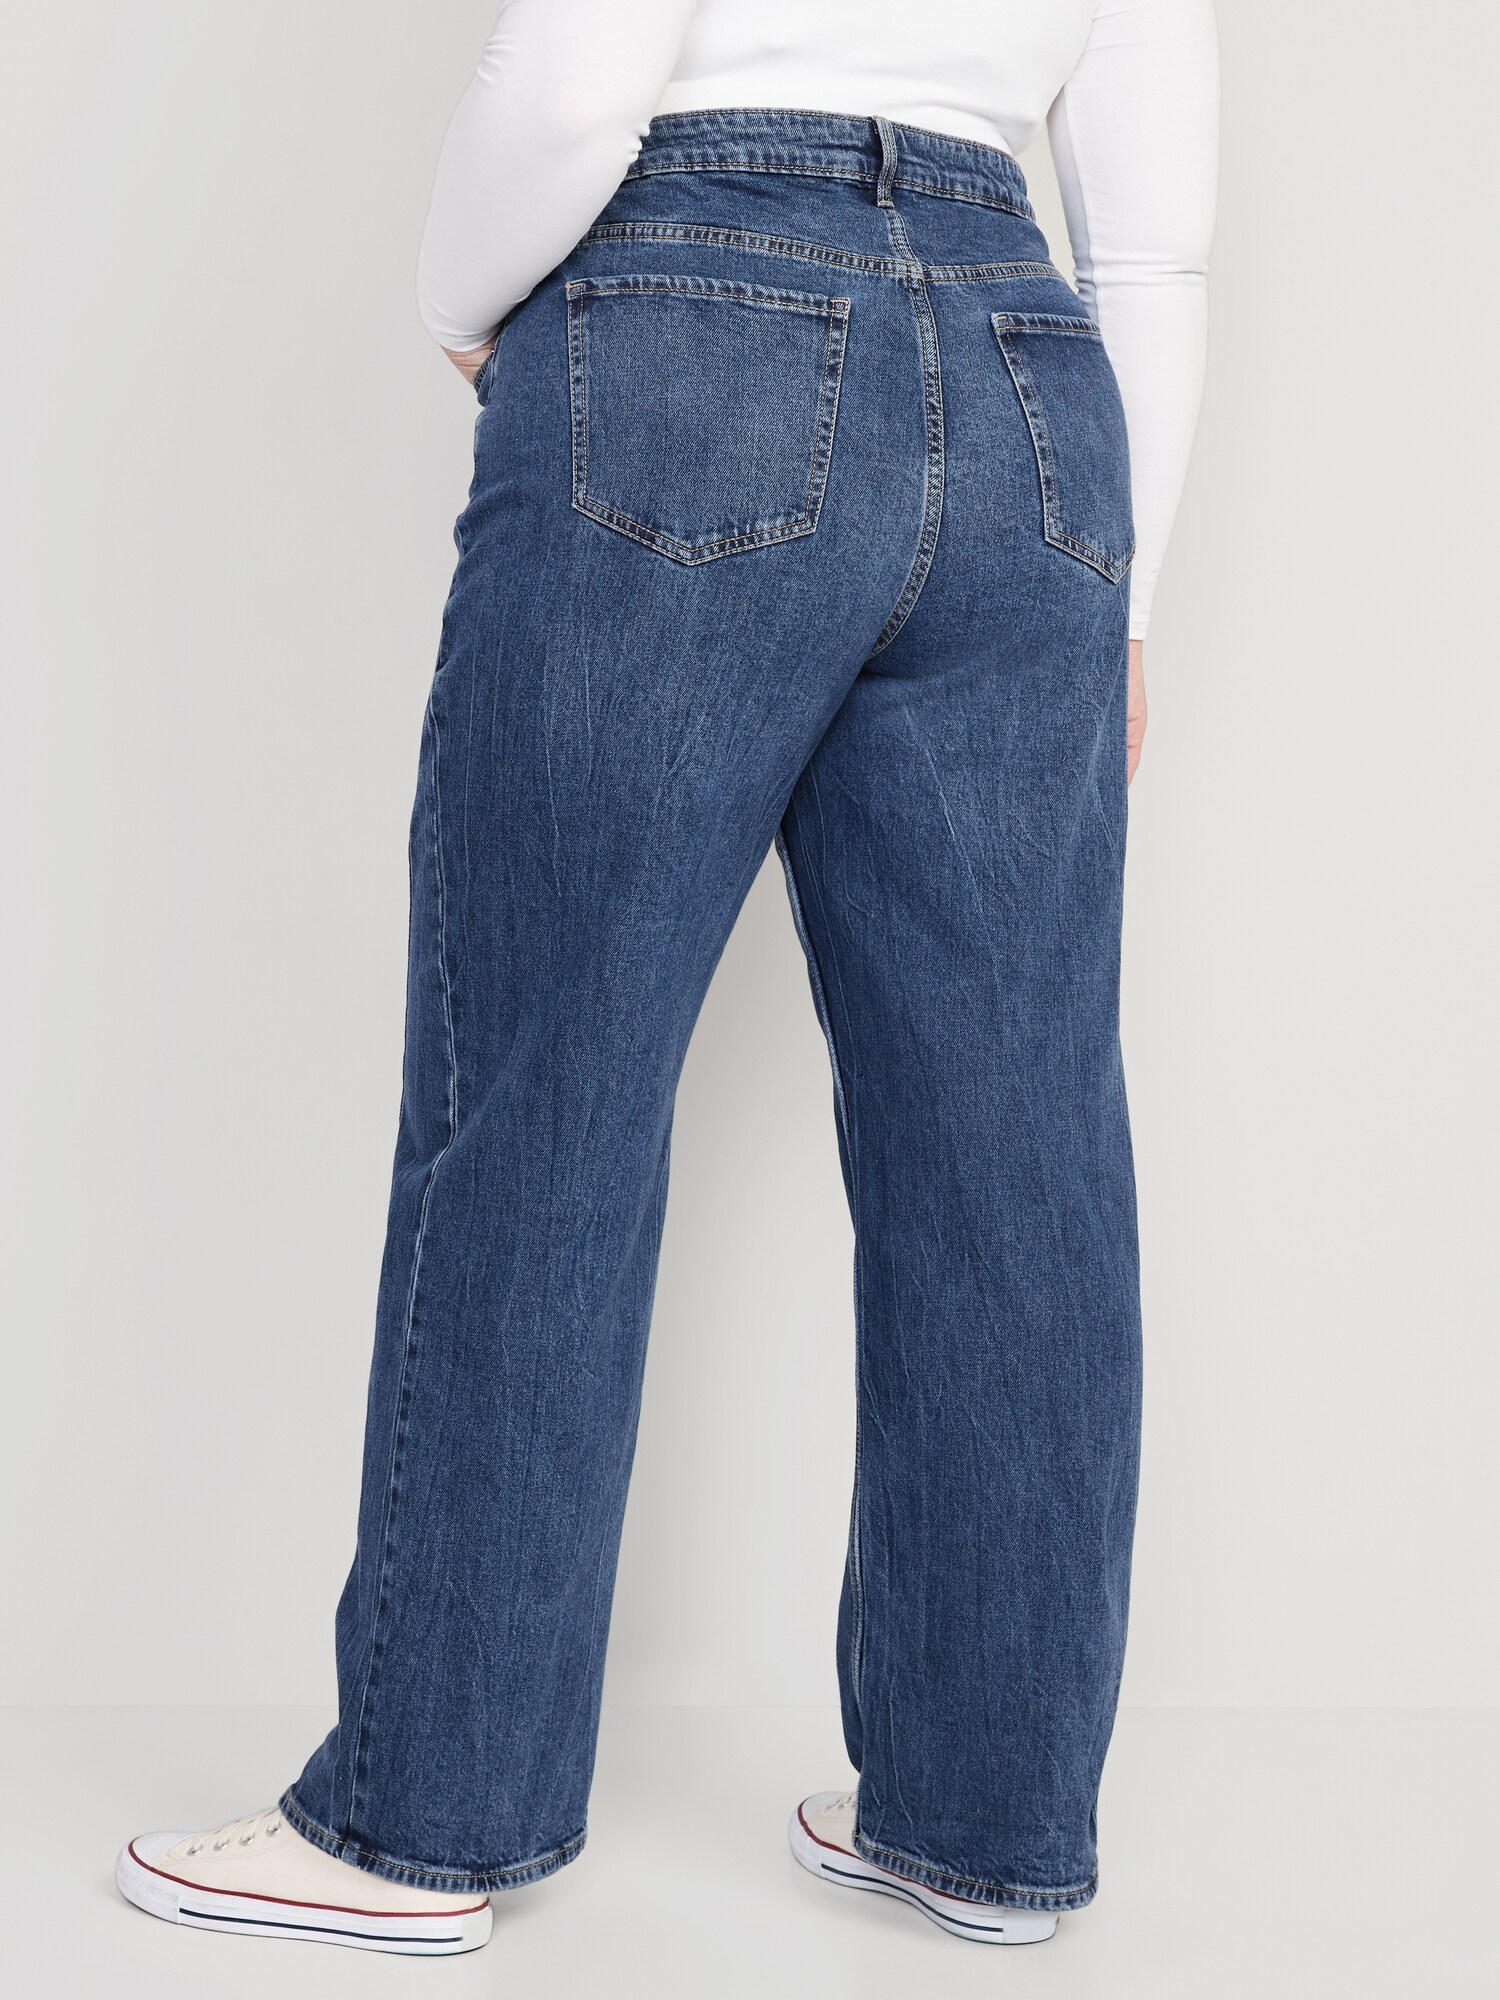 Buy Infinite Fit High Rise Straight Leg Jeans Plus Size for CAD 44.00